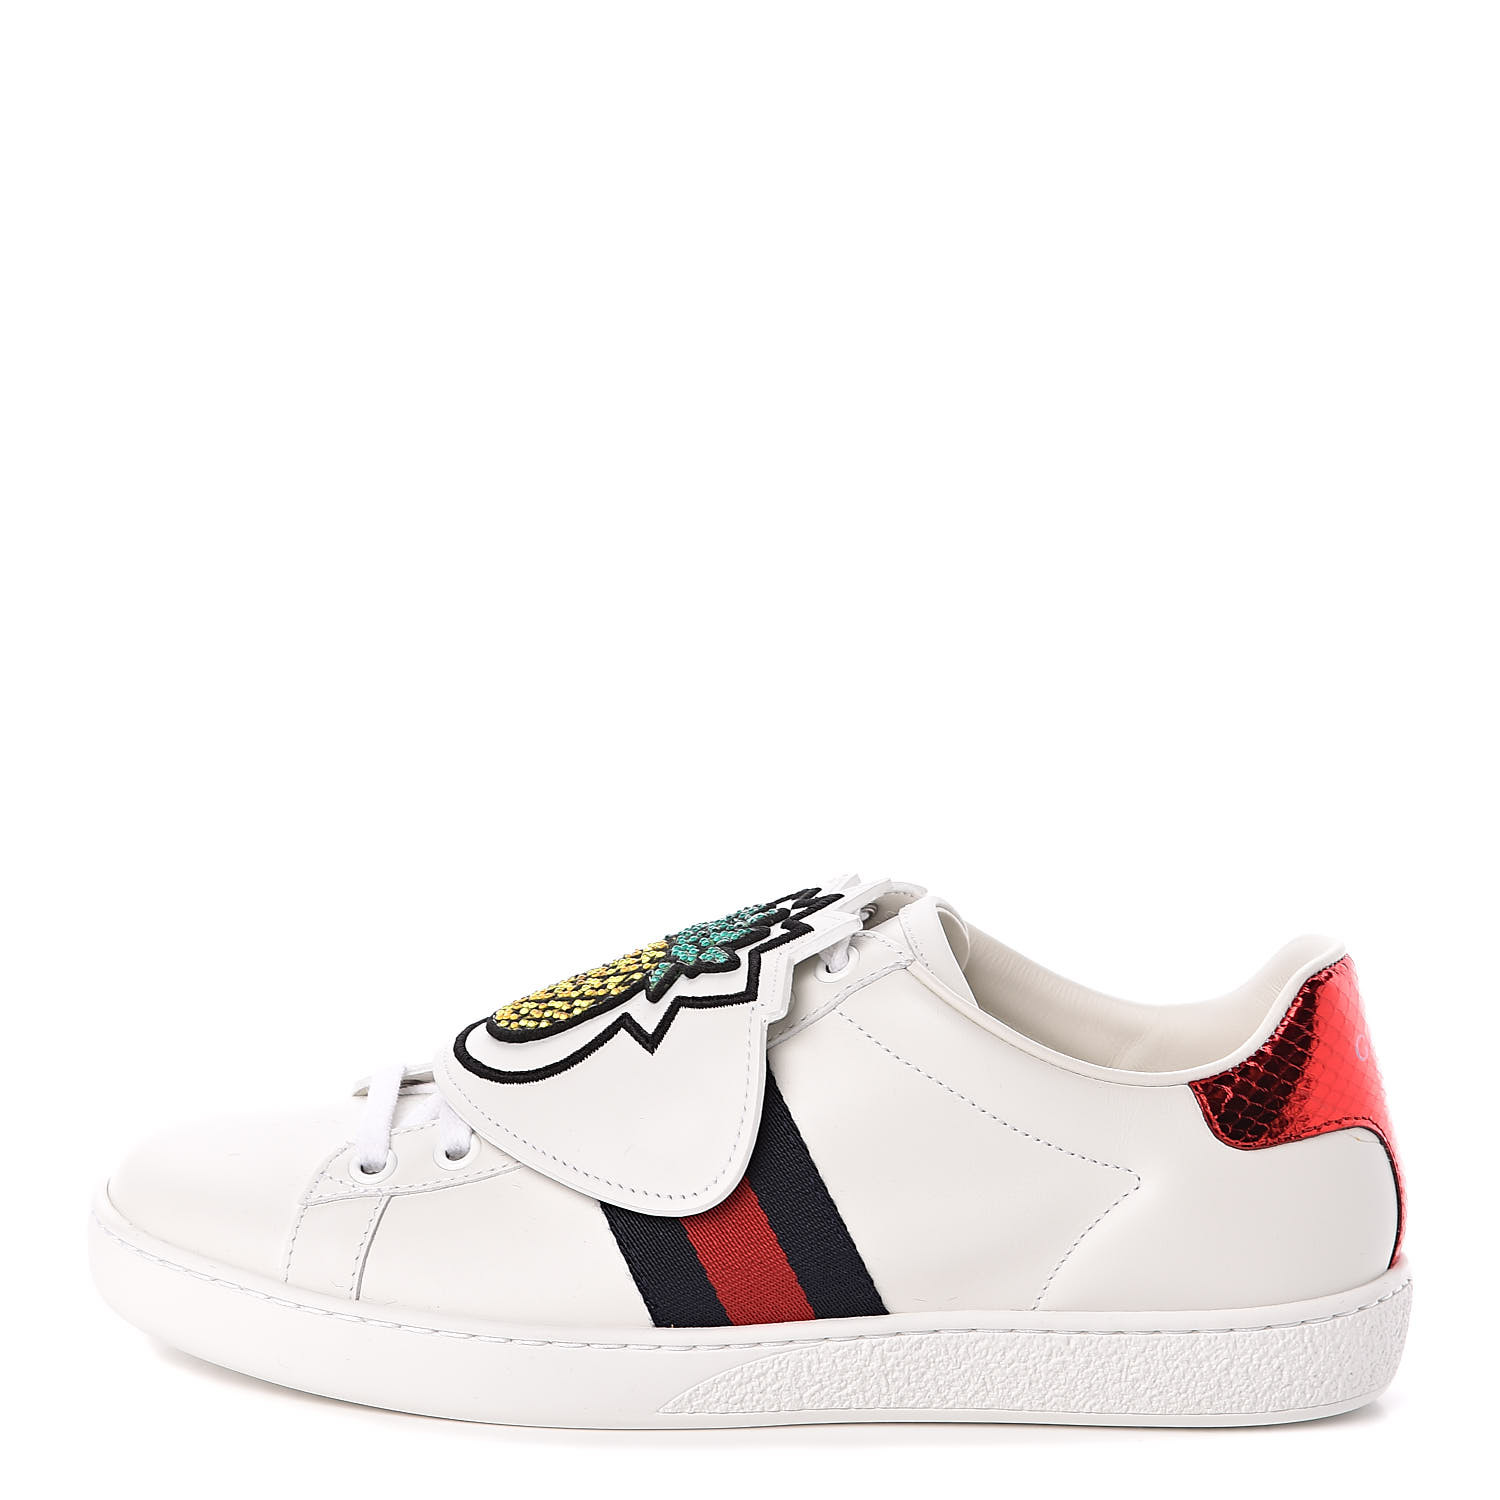 GUCCI Calfskin Crystal Womens New Ace Pineapple Sneakers 37 White 507578